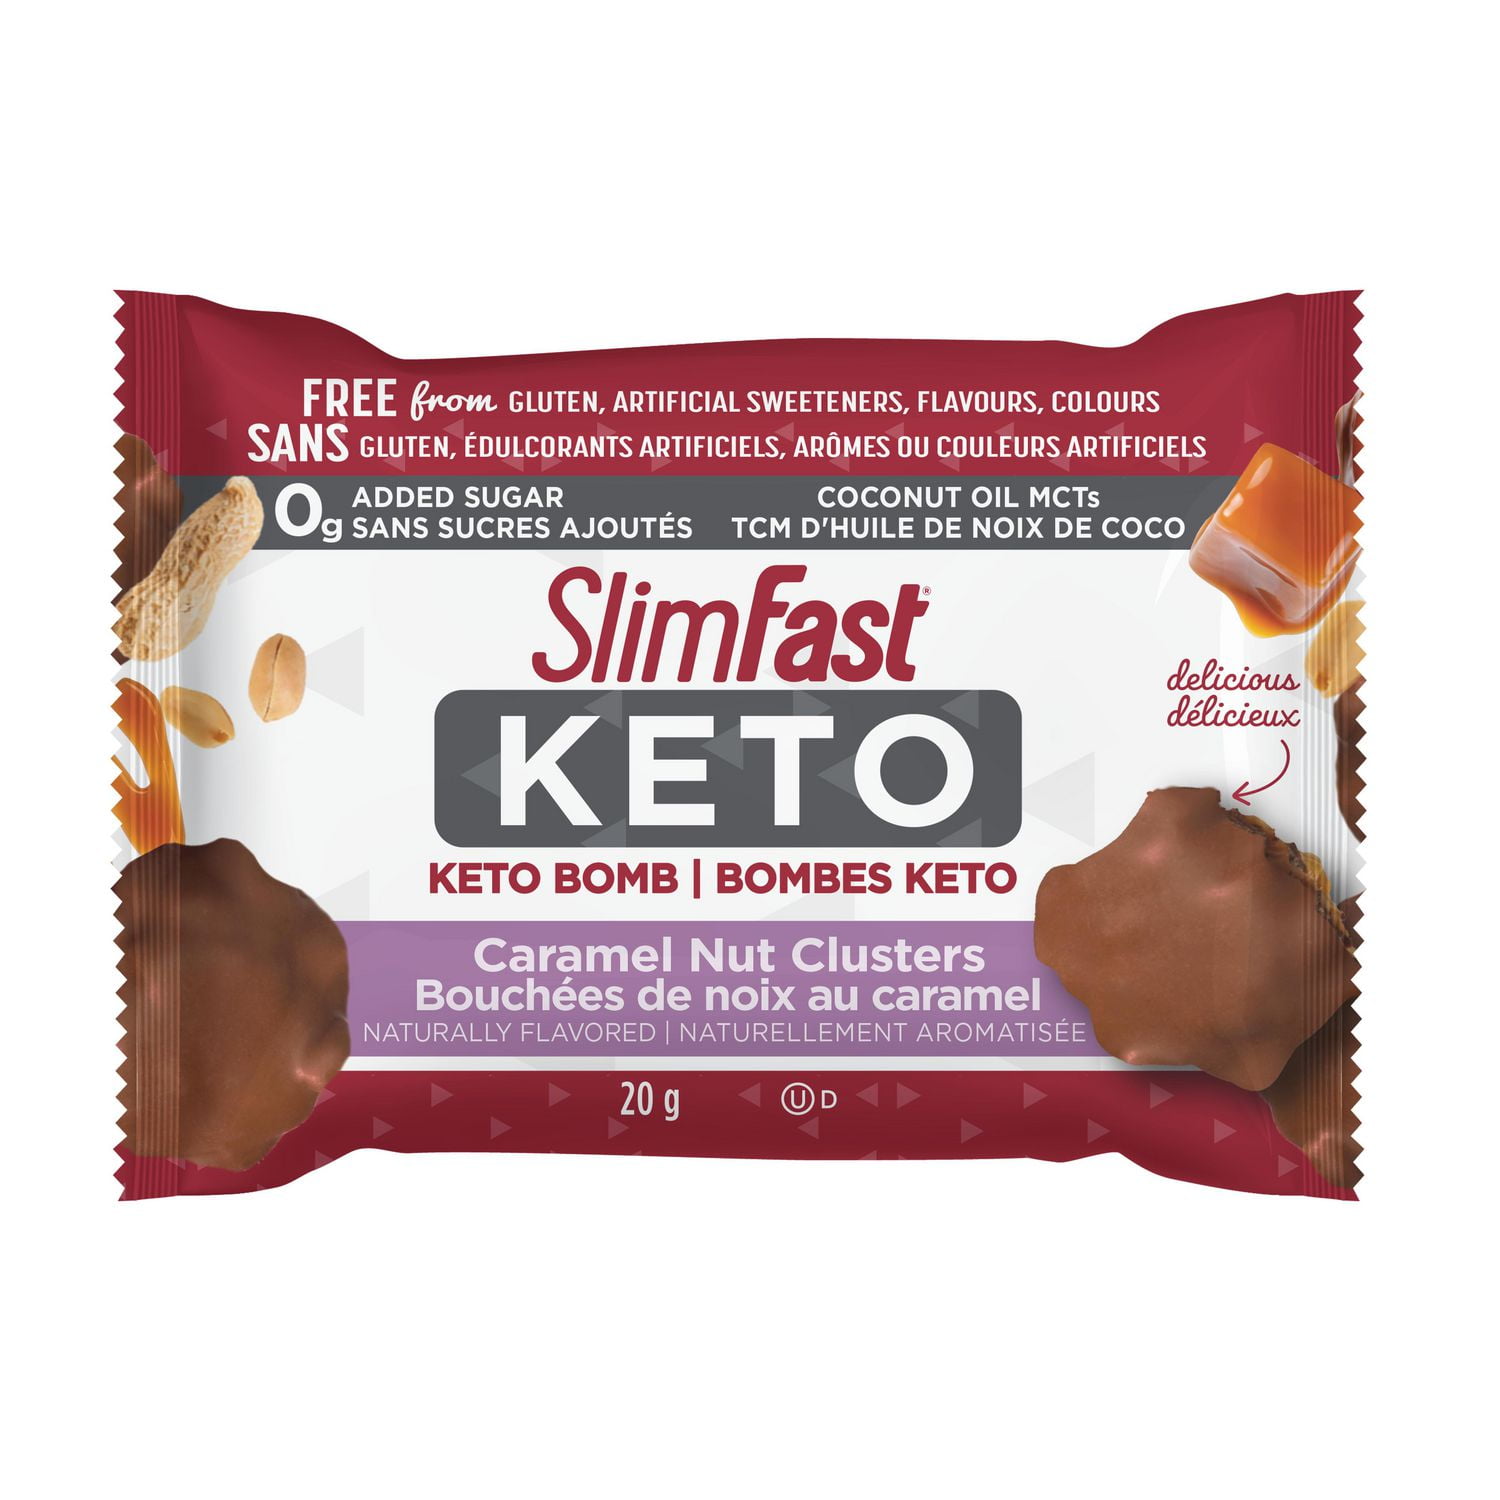 Purely Inspired Keto All-in-One, Smooth Vanilla (272g), All-in-One